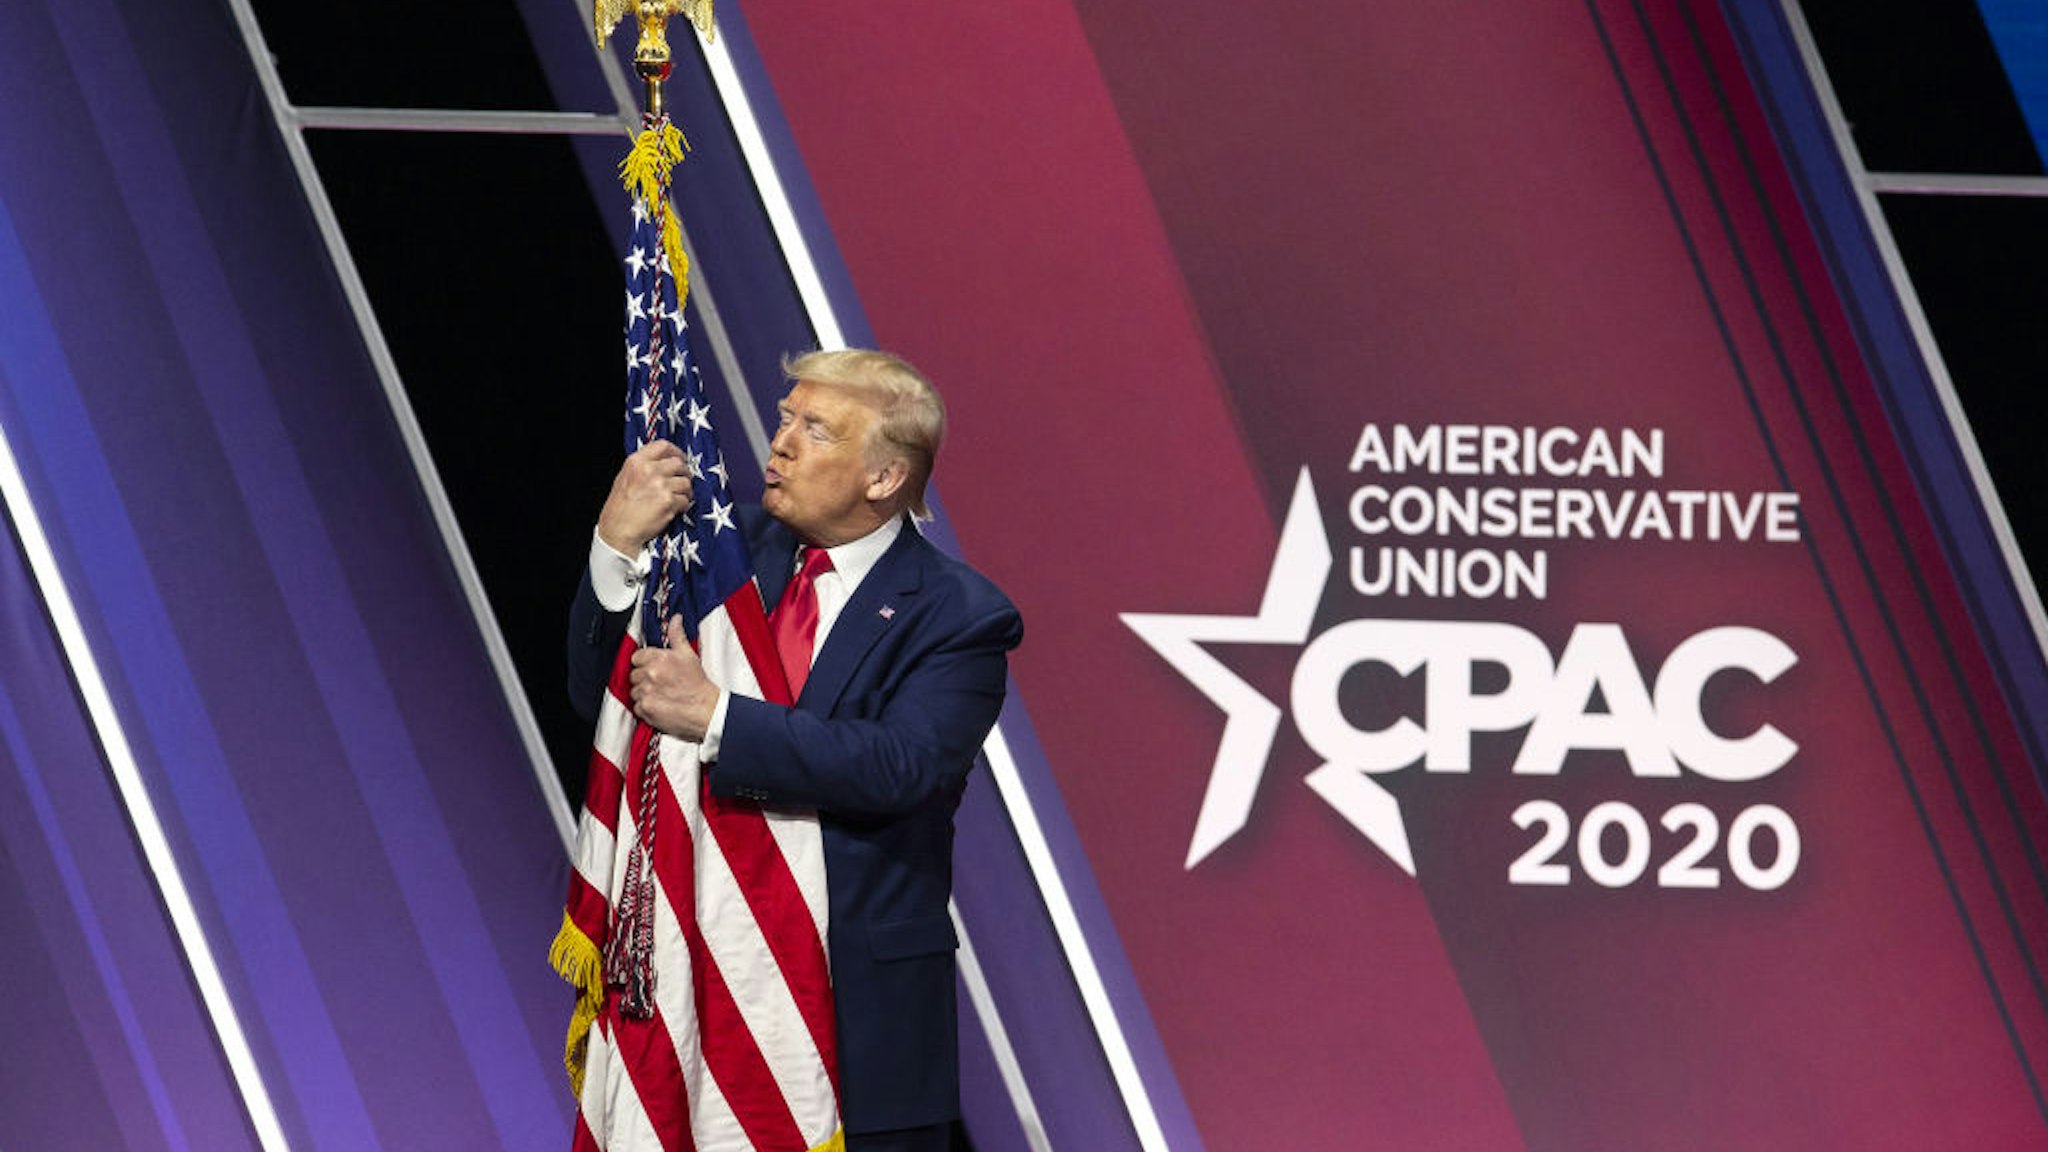 U.S. President Donald Trump hugs and kisses the American flag during the Conservative Political Action Conference (CPAC) in National Harbor, Maryland, U.S., on Saturday, Feb. 29, 2020.